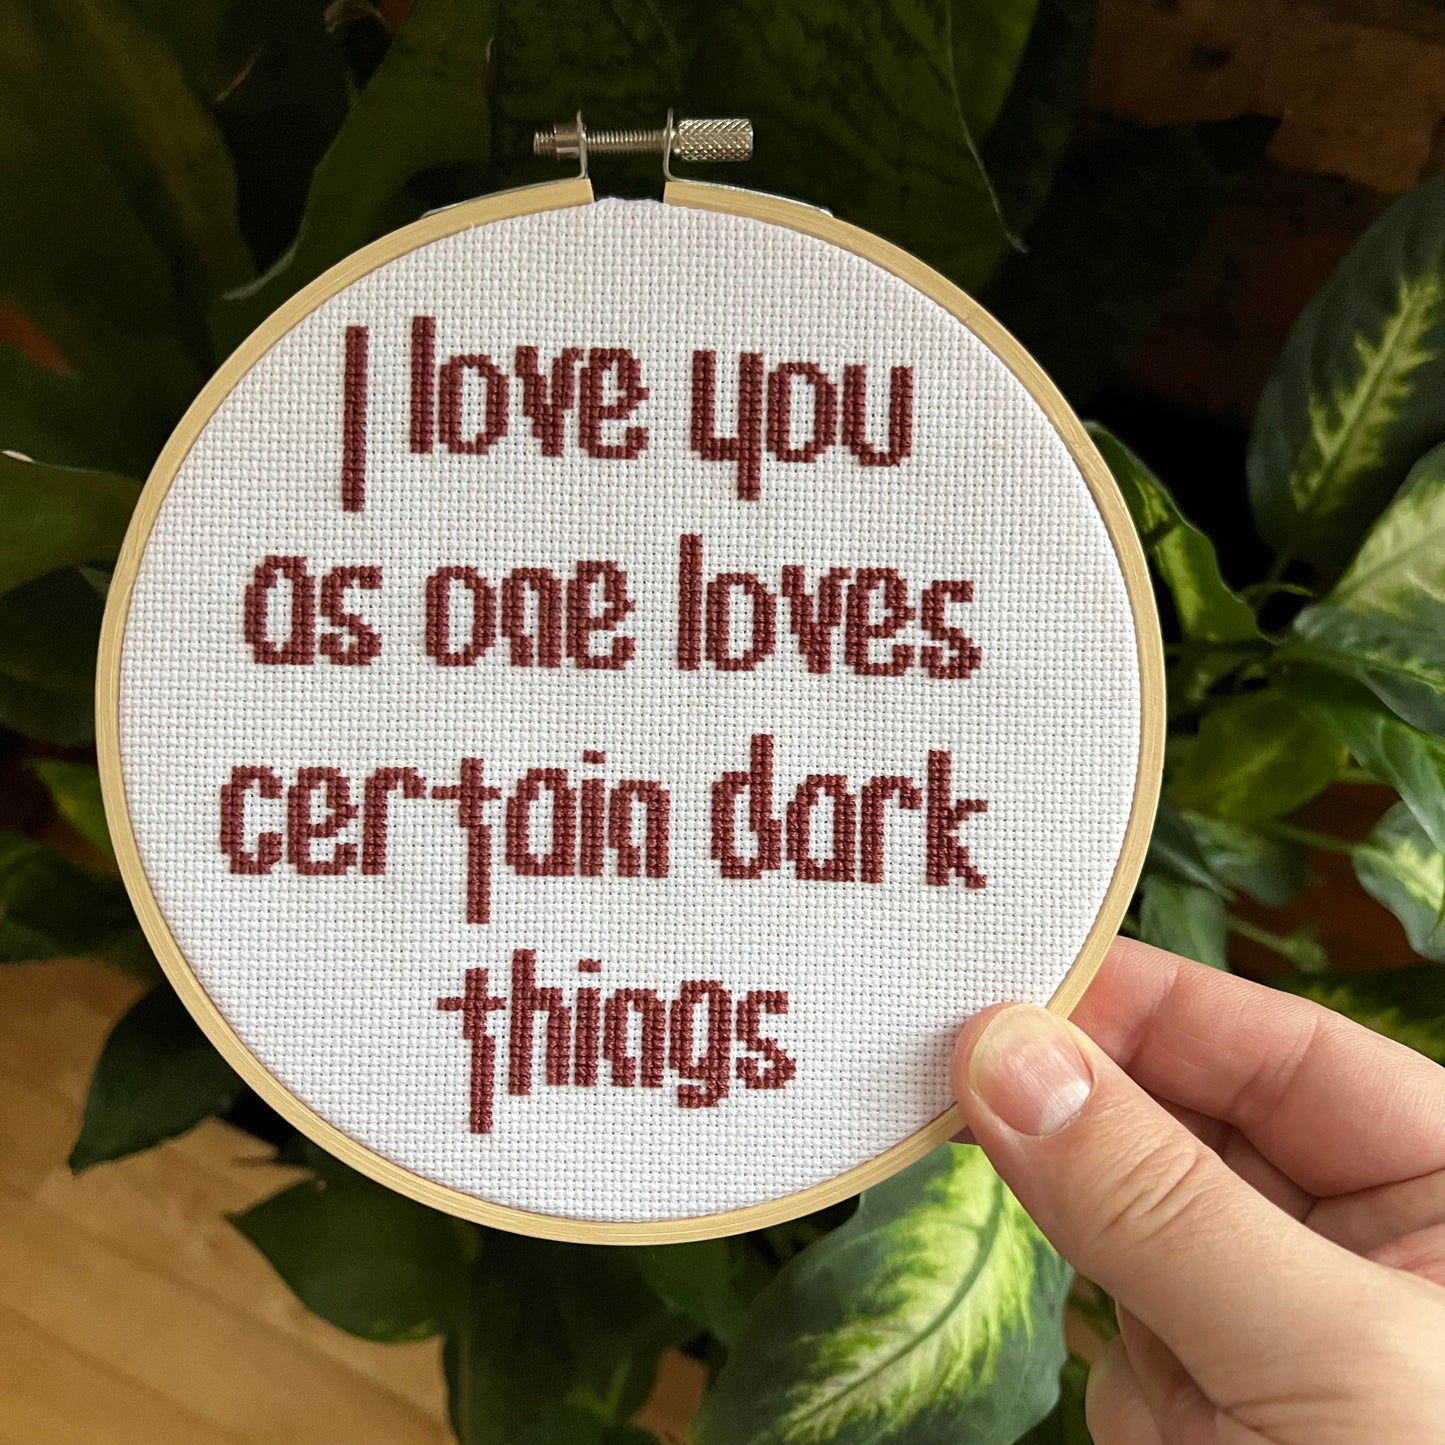 I Love You As One Loves Certain Dark Things 6” Hand Stitched Cross Stitch Hoop